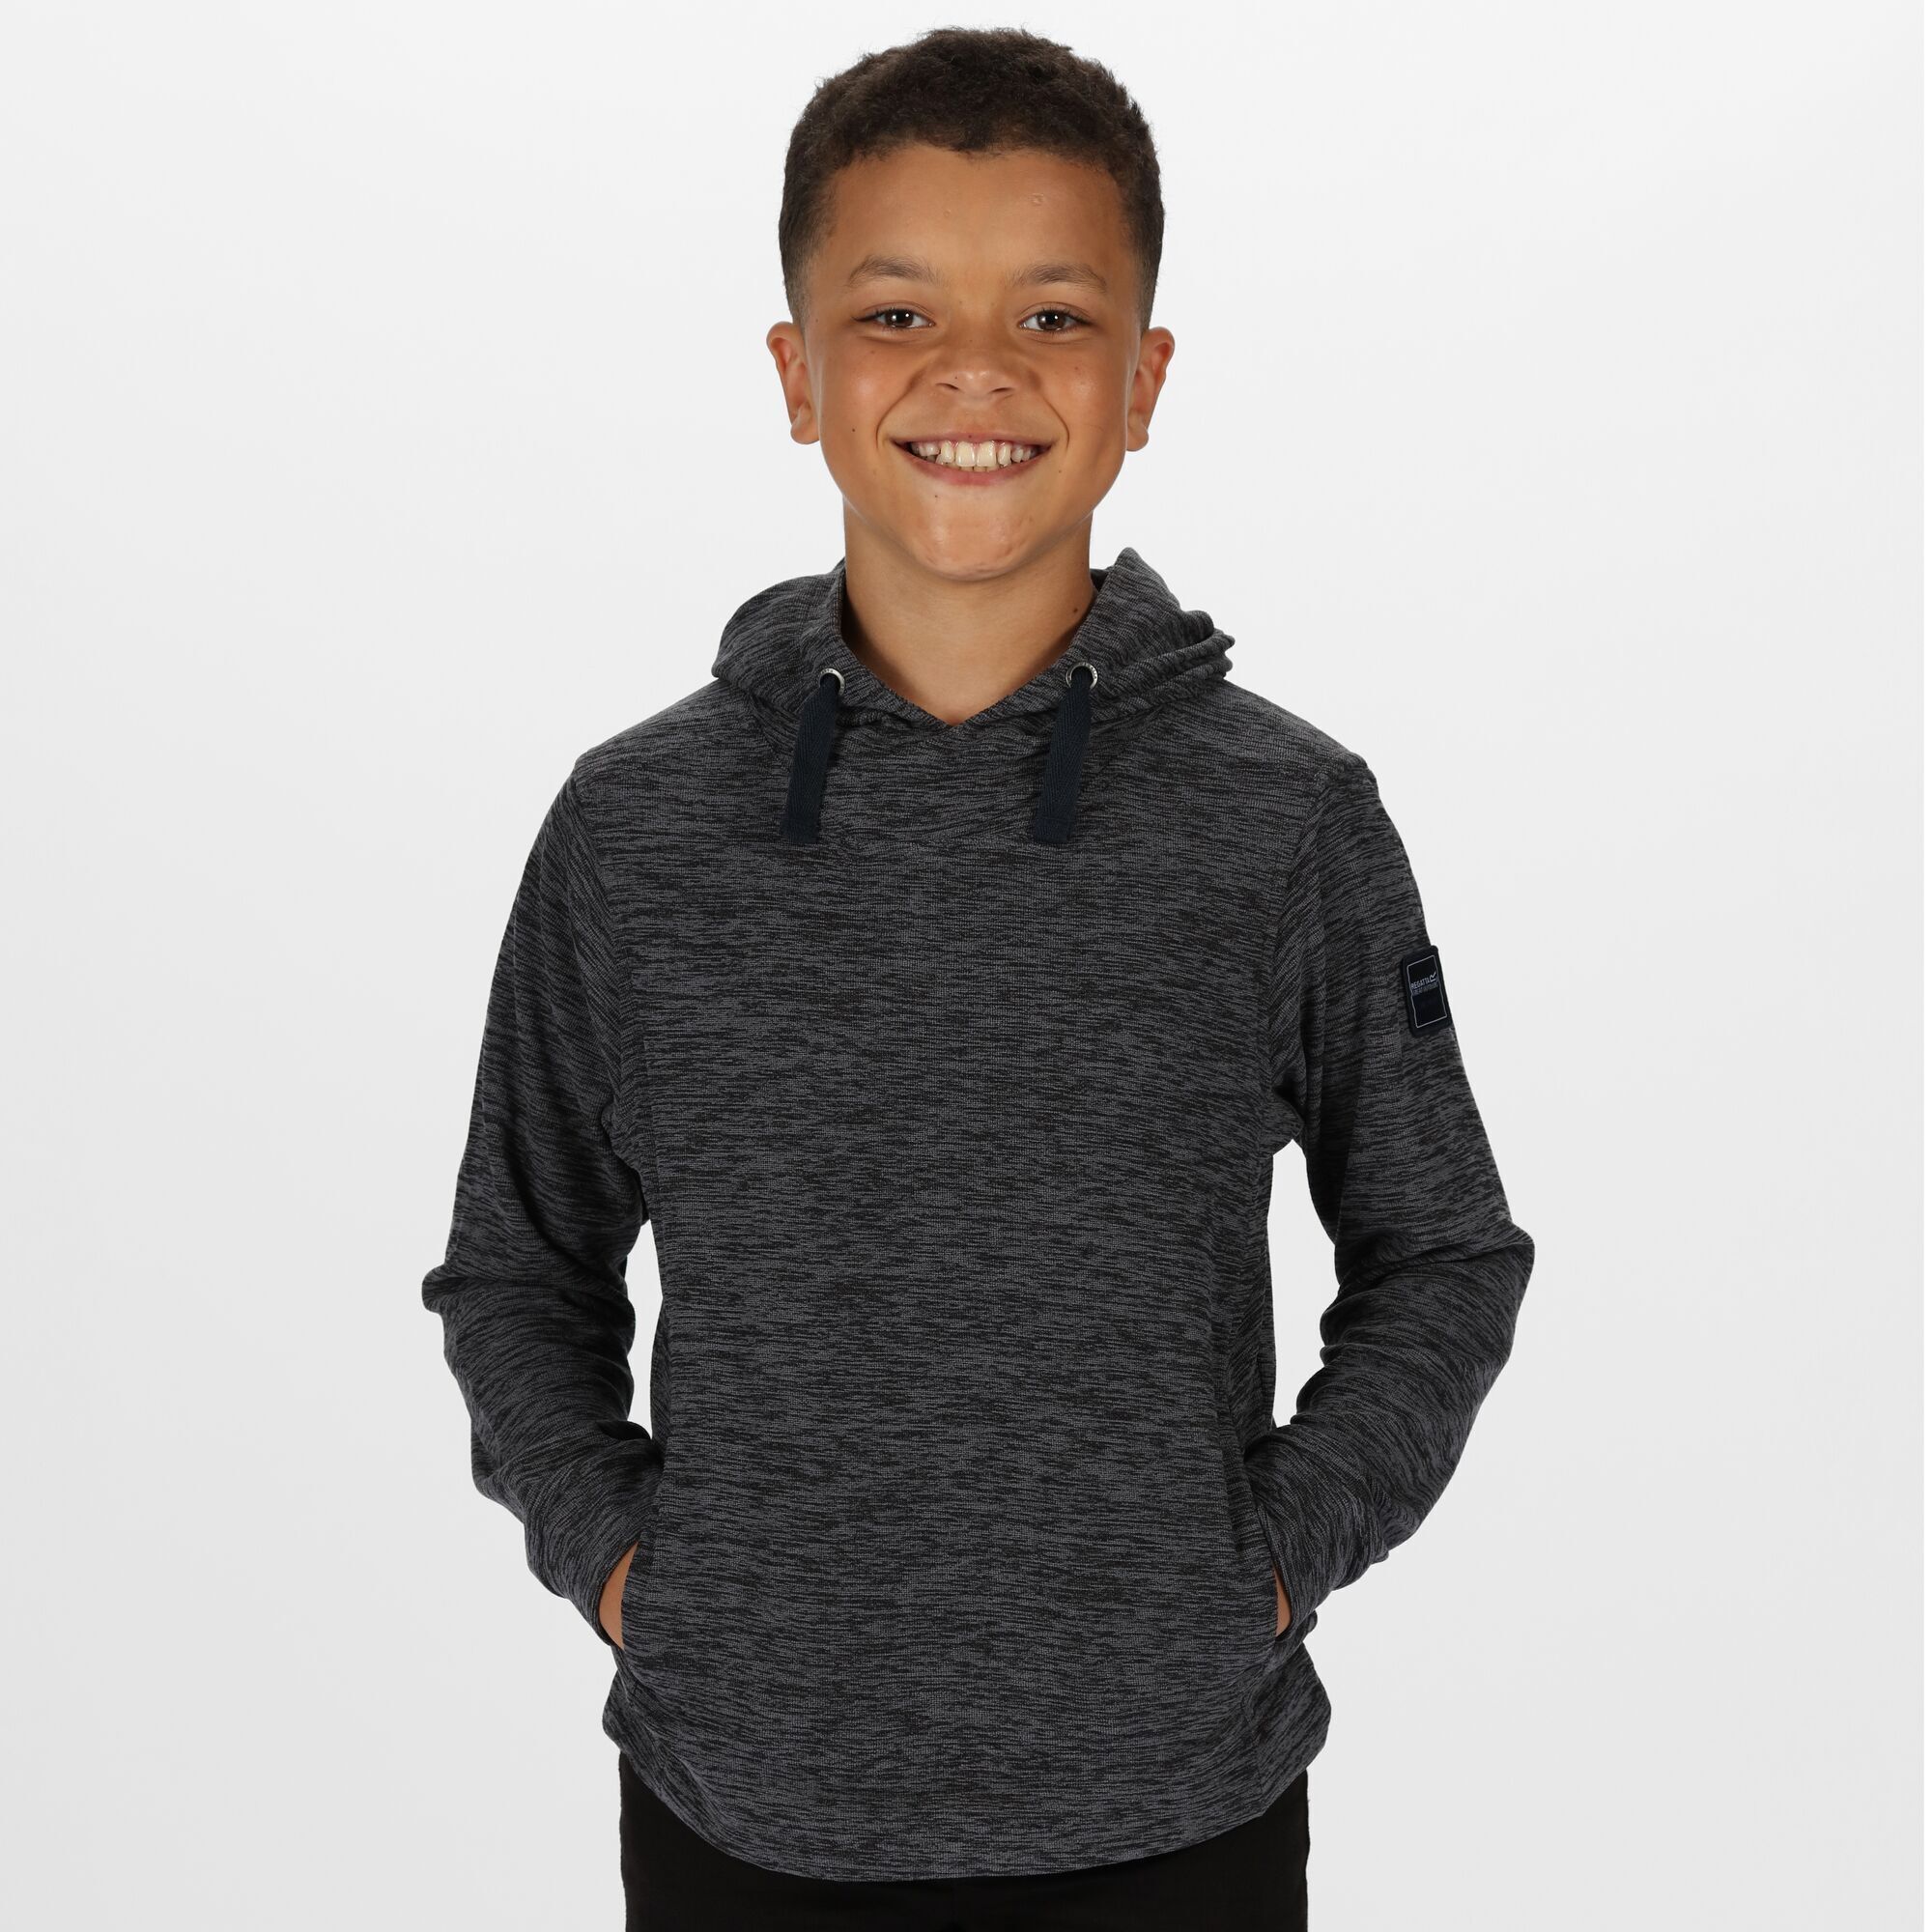 Material: 100% polyester. Polyester marl towelling fabric. Grown on hood with wrap over construction. Decorative drawcord at hood 7-8 years and up. 2 lower pockets. Chest sizes to fit: (3-4 Yrs): 55-57cm, (5-6 Yrs): 59-61cm, (7-8 Yrs): 63-67cm, (9-10 Yrs): 69-73cm, (11-12 Yrs): 75-79cm, (13 Yrs): 82cm, (14 Yrs): 86cm, (15-16 Yrs): 89-92cm.